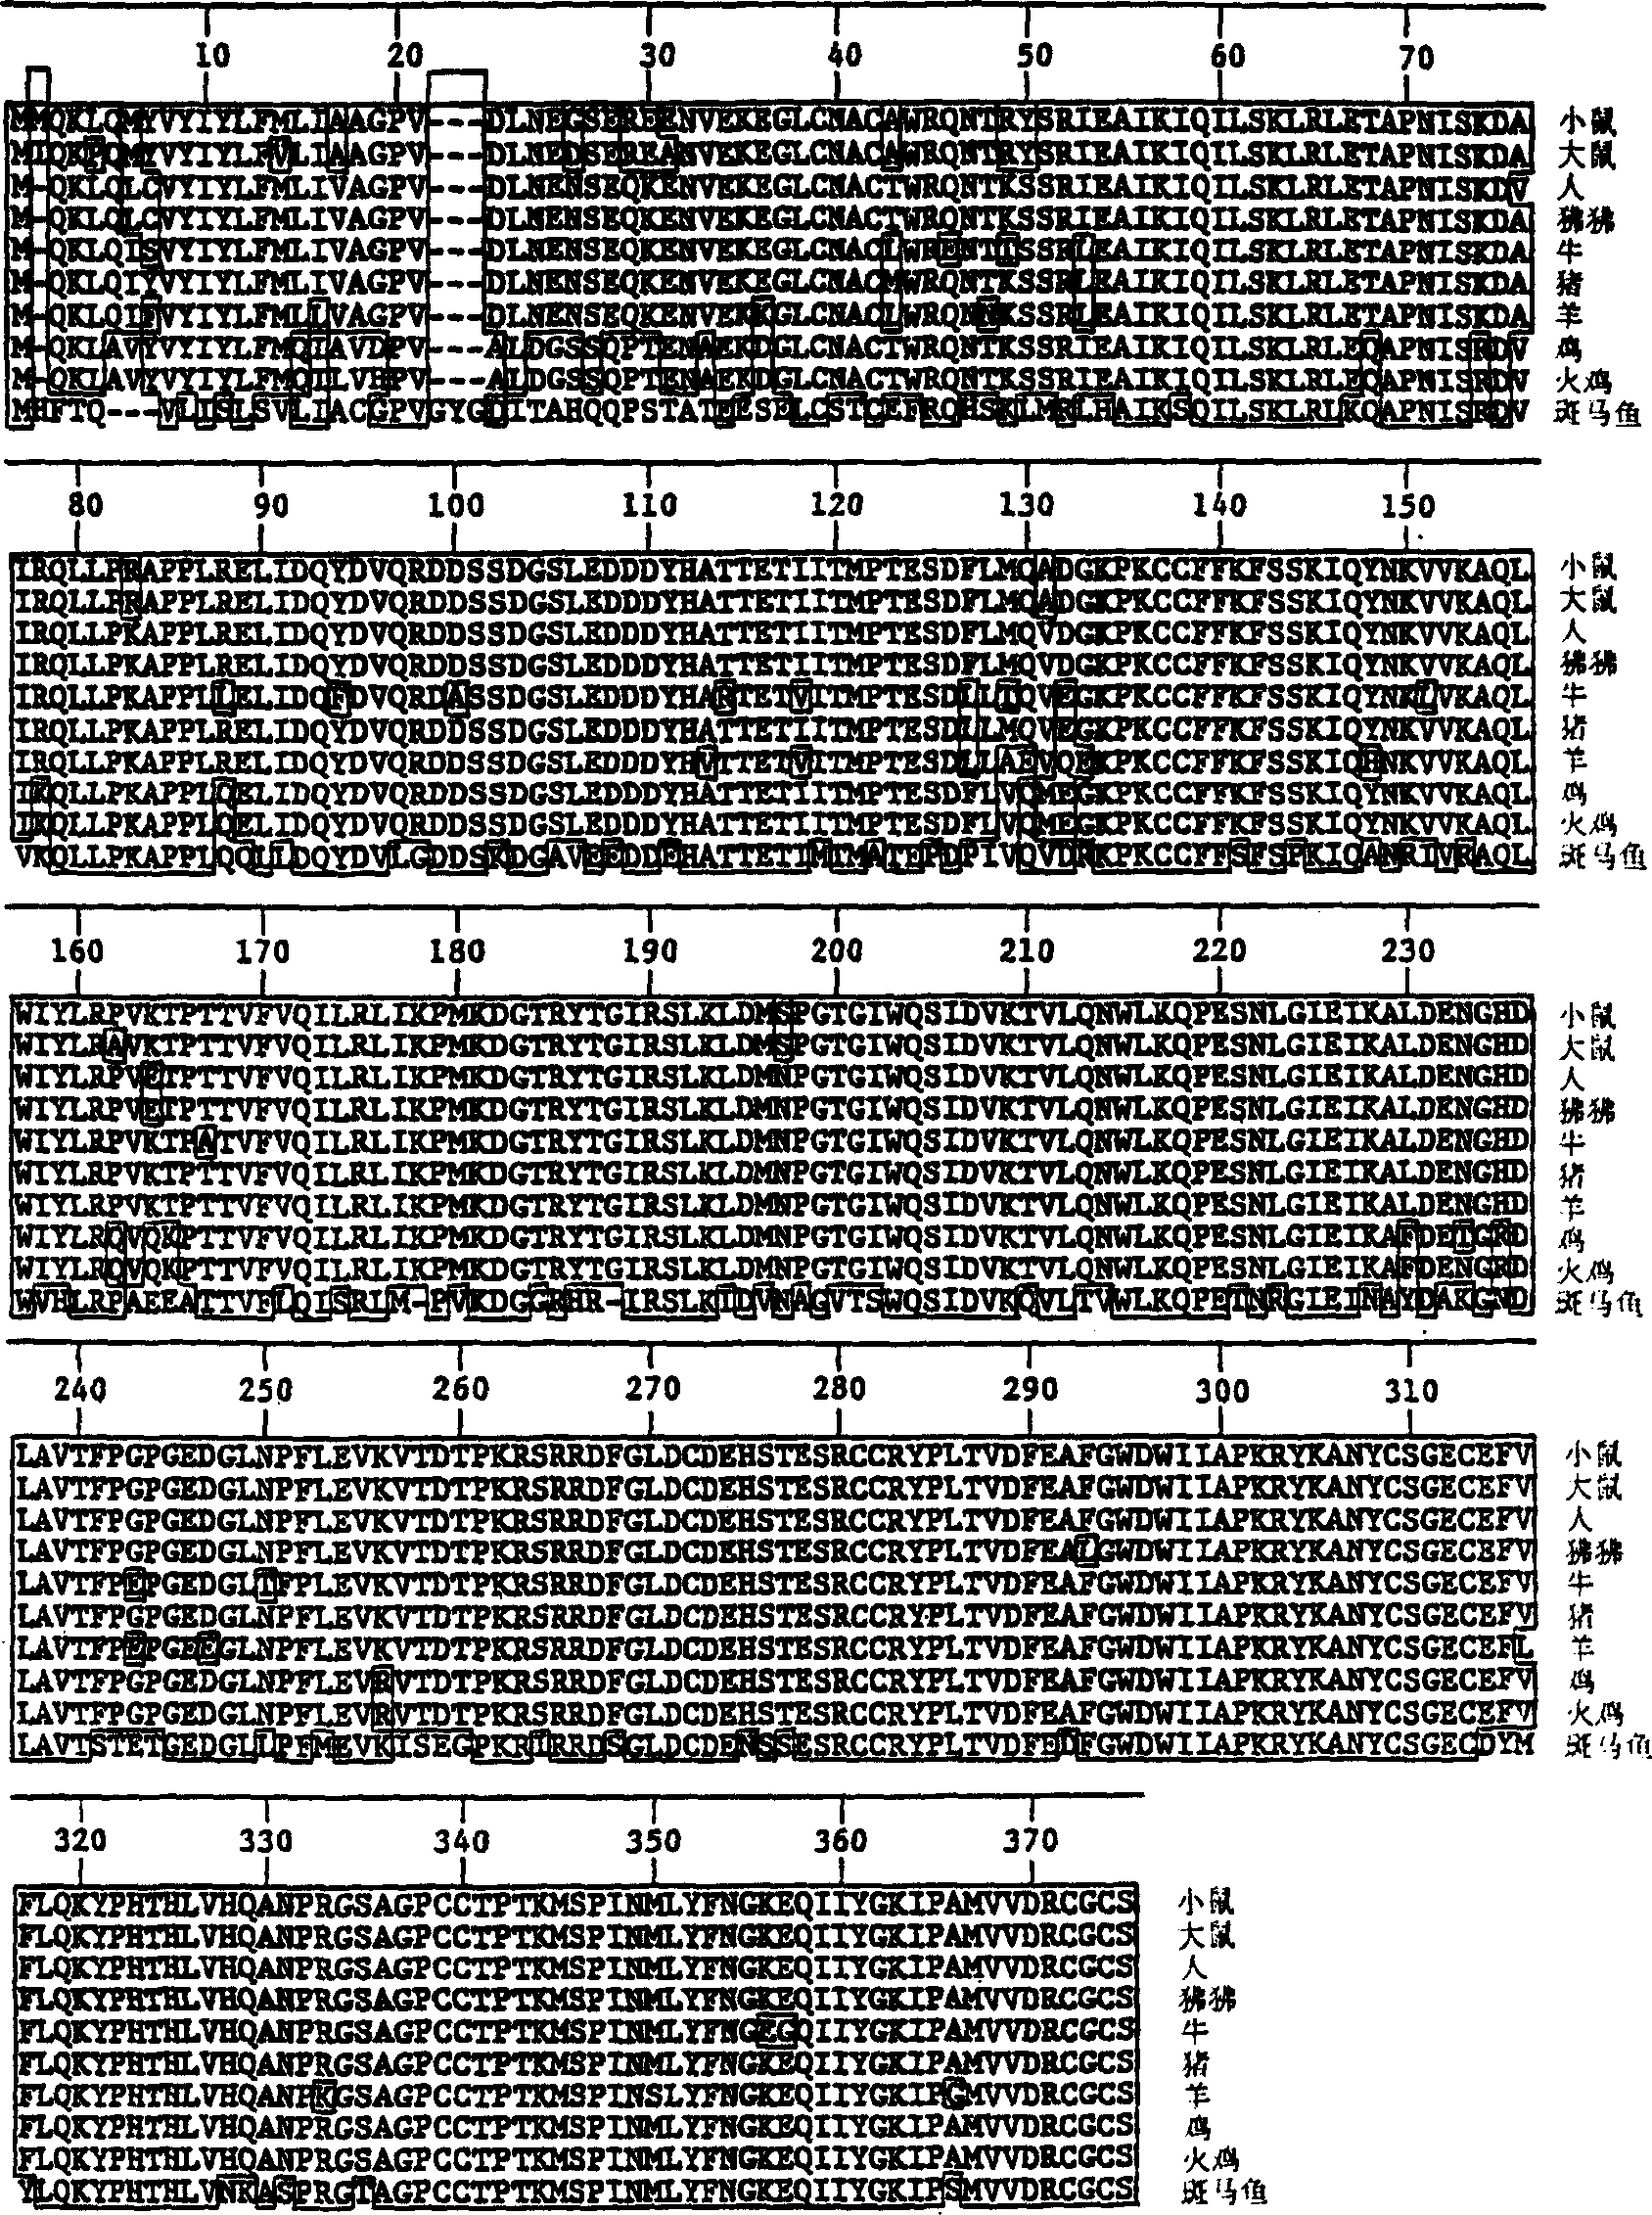 Growth differentiation factor receptors, agonists and antagonists thereof, and methods of using same